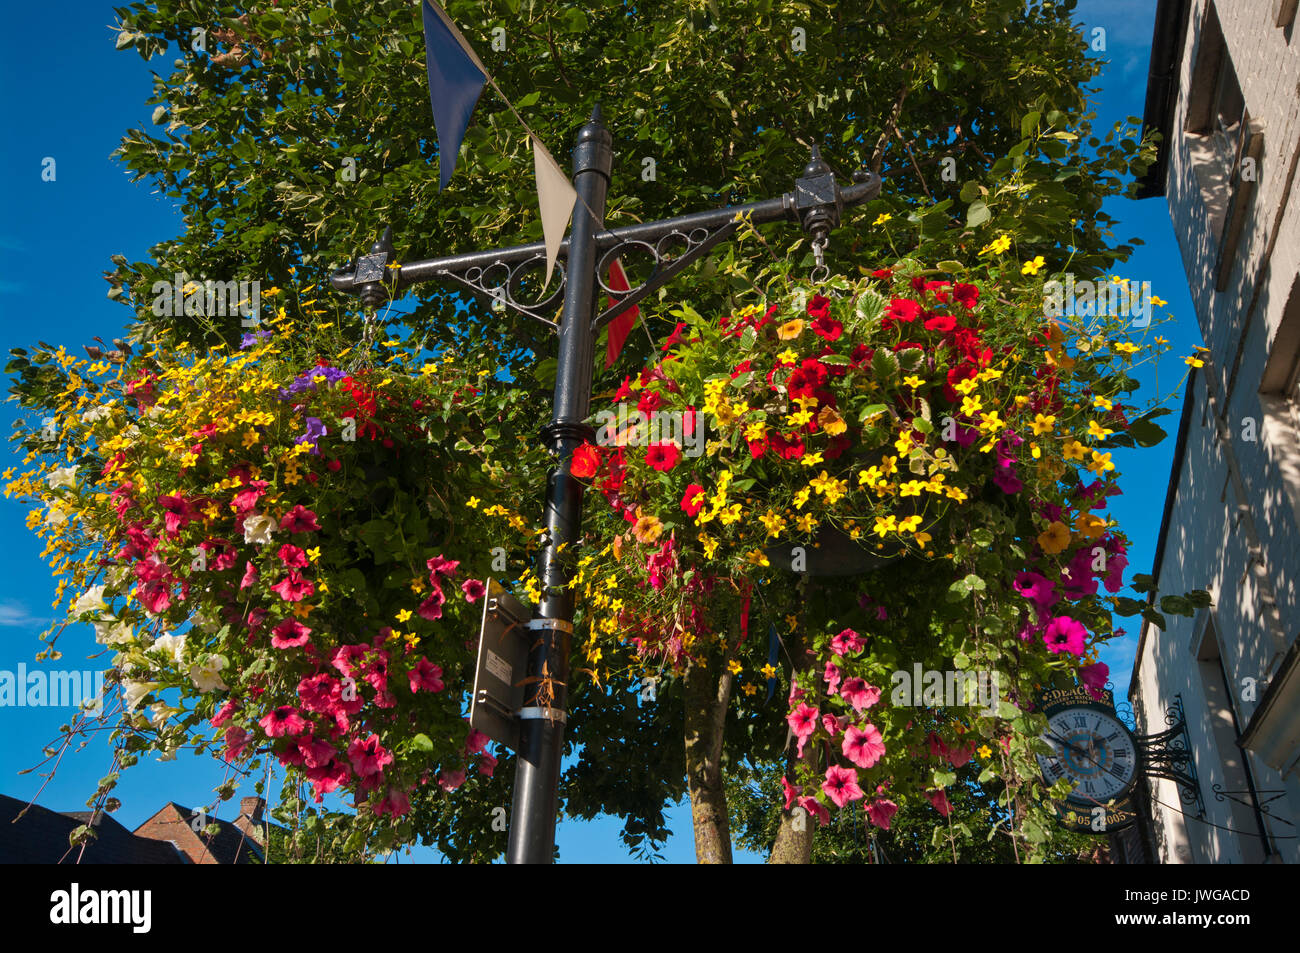 Colourful Hanging Baskets On Street Lamp posts Royal Wootton Bassett Wiltshire England UK Stock Photo